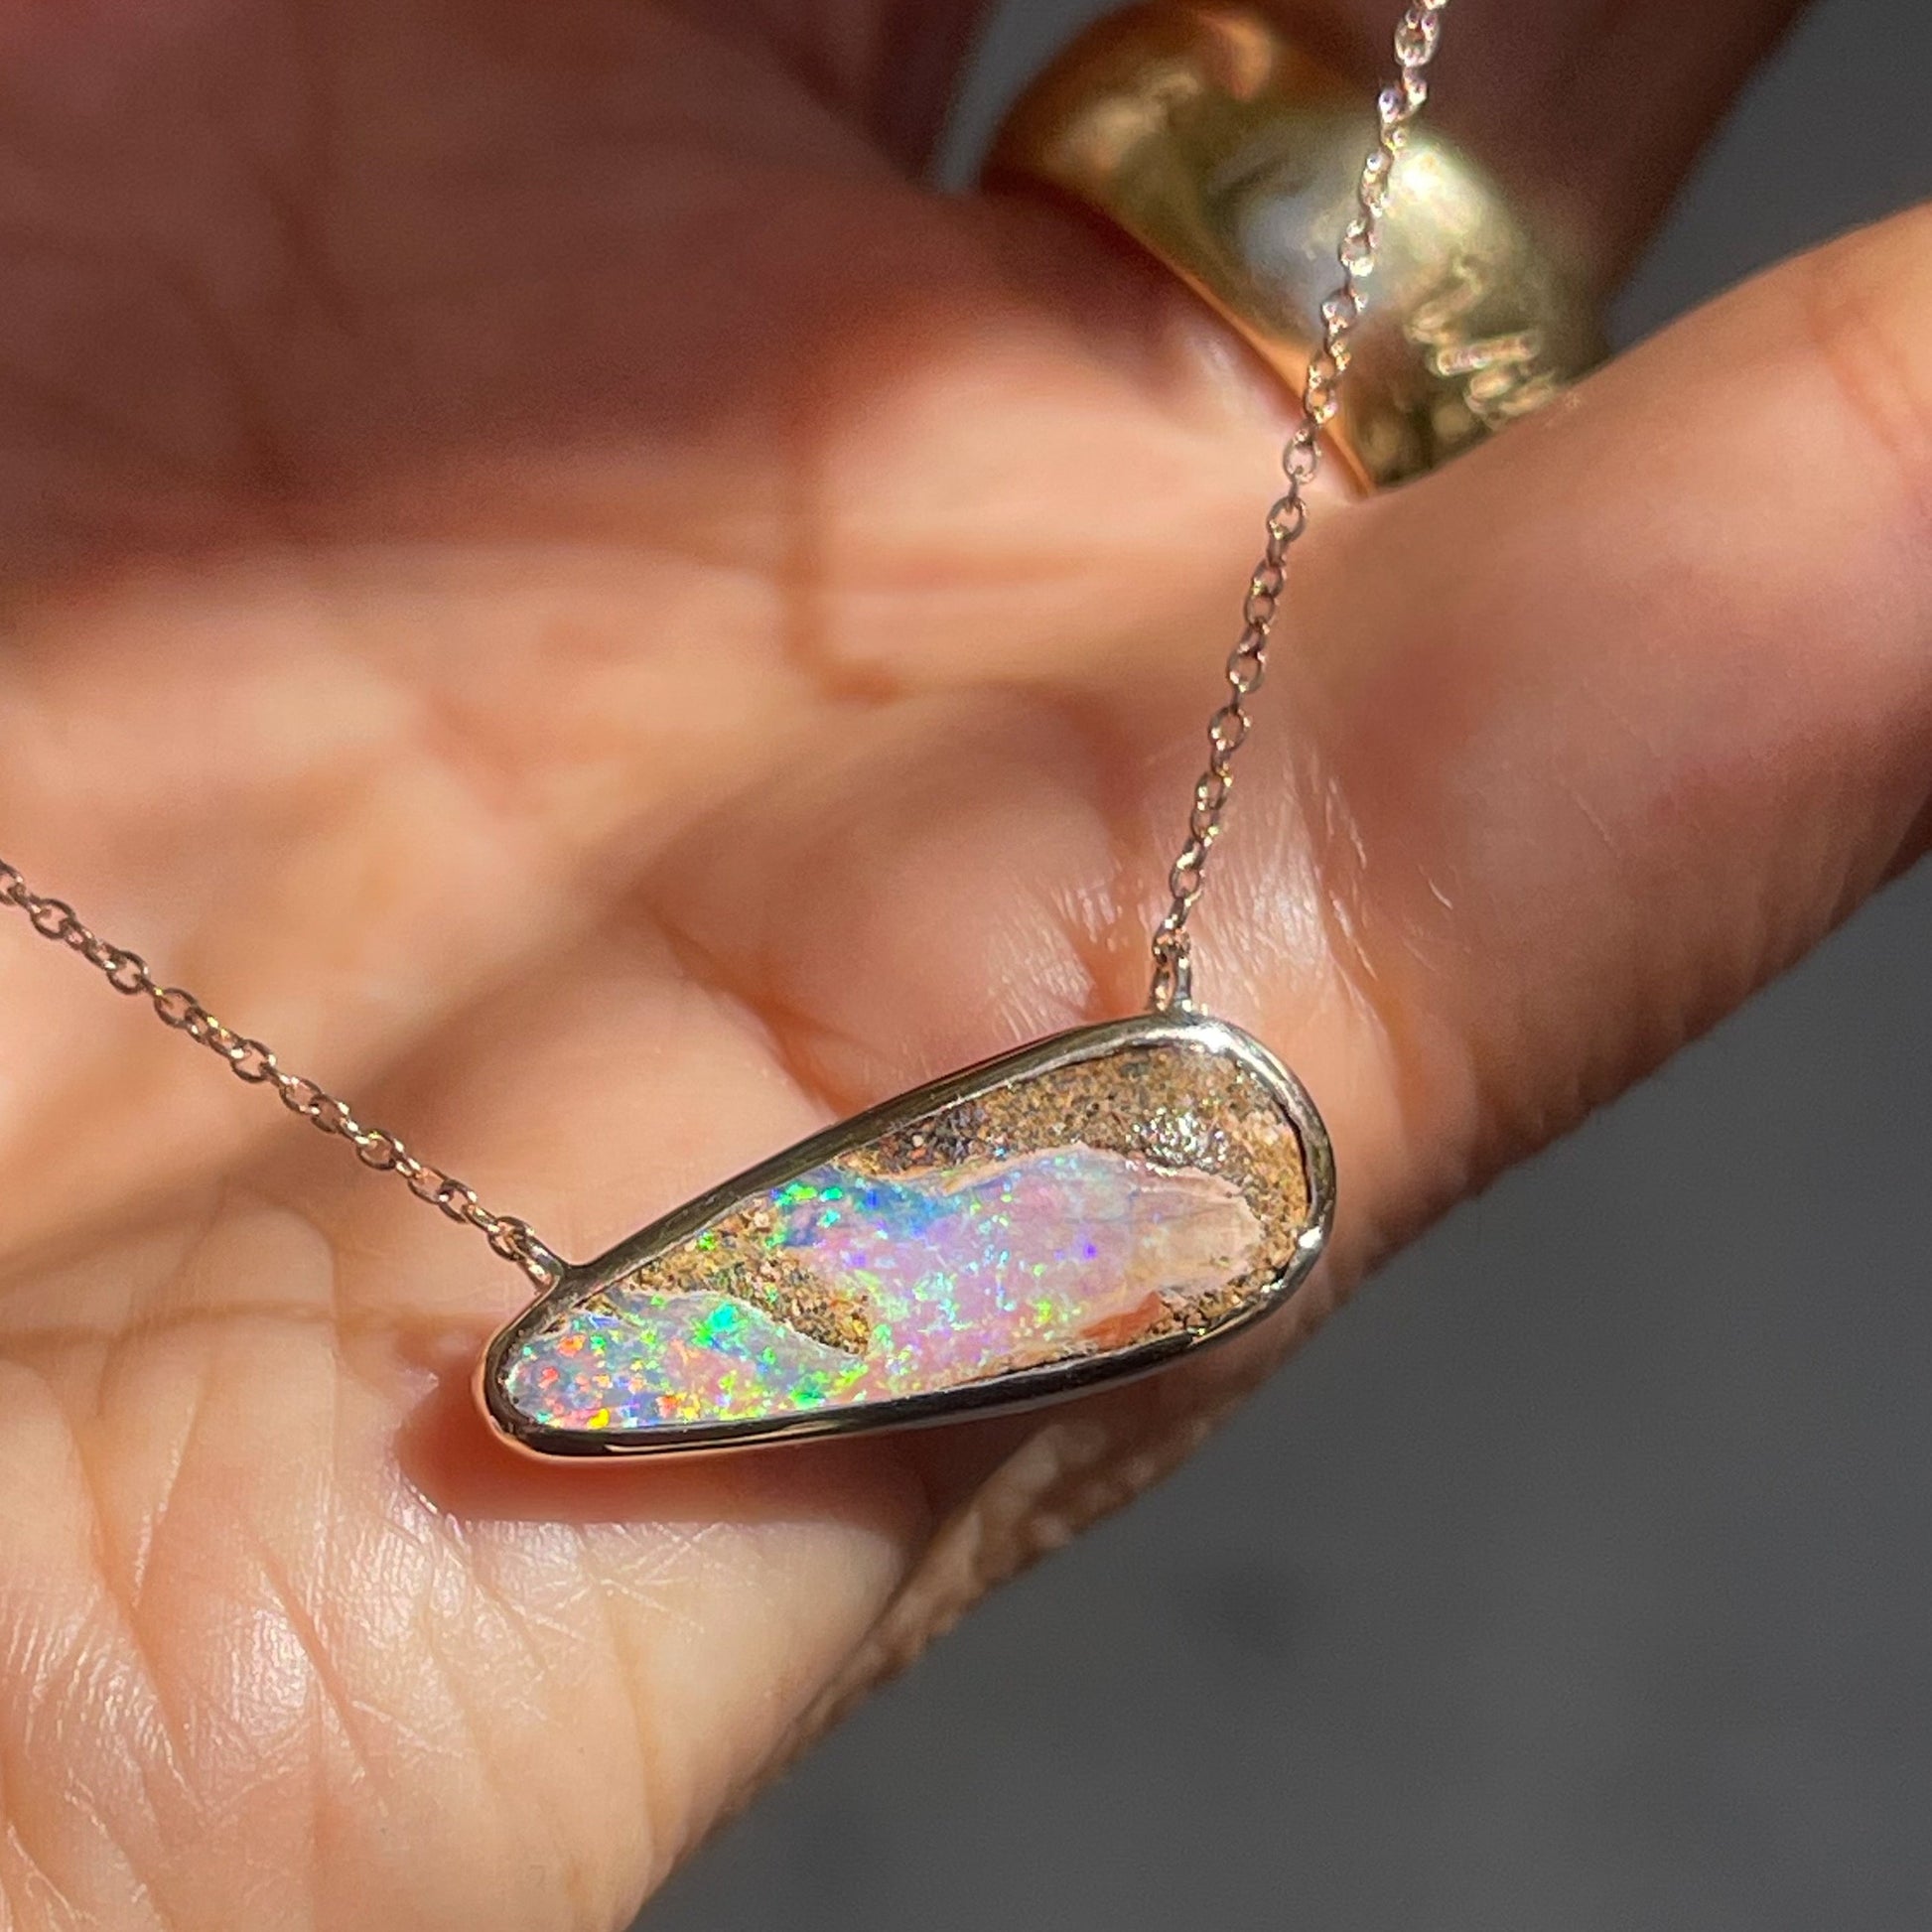 An Australian Opal Necklace by NIXIN Jewelry resting on the palm of a hand. The Australian Opal stone is elongated and displays both host stone and precious Crystal Opal on its face.